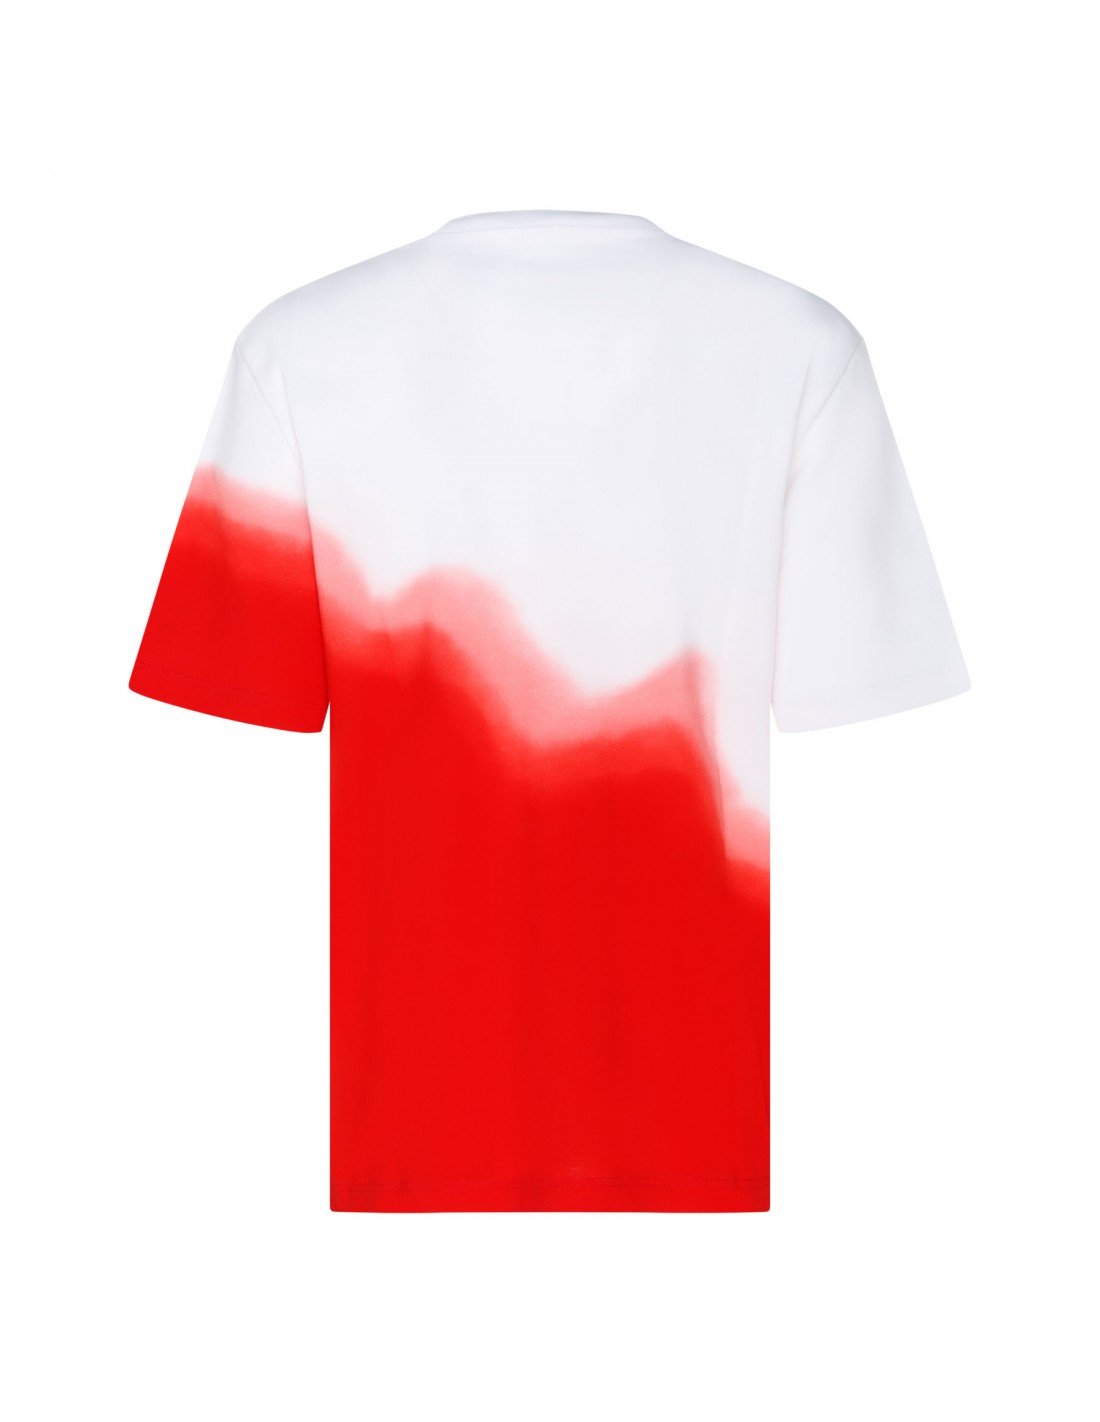 Tie-dye white and red T-shirt